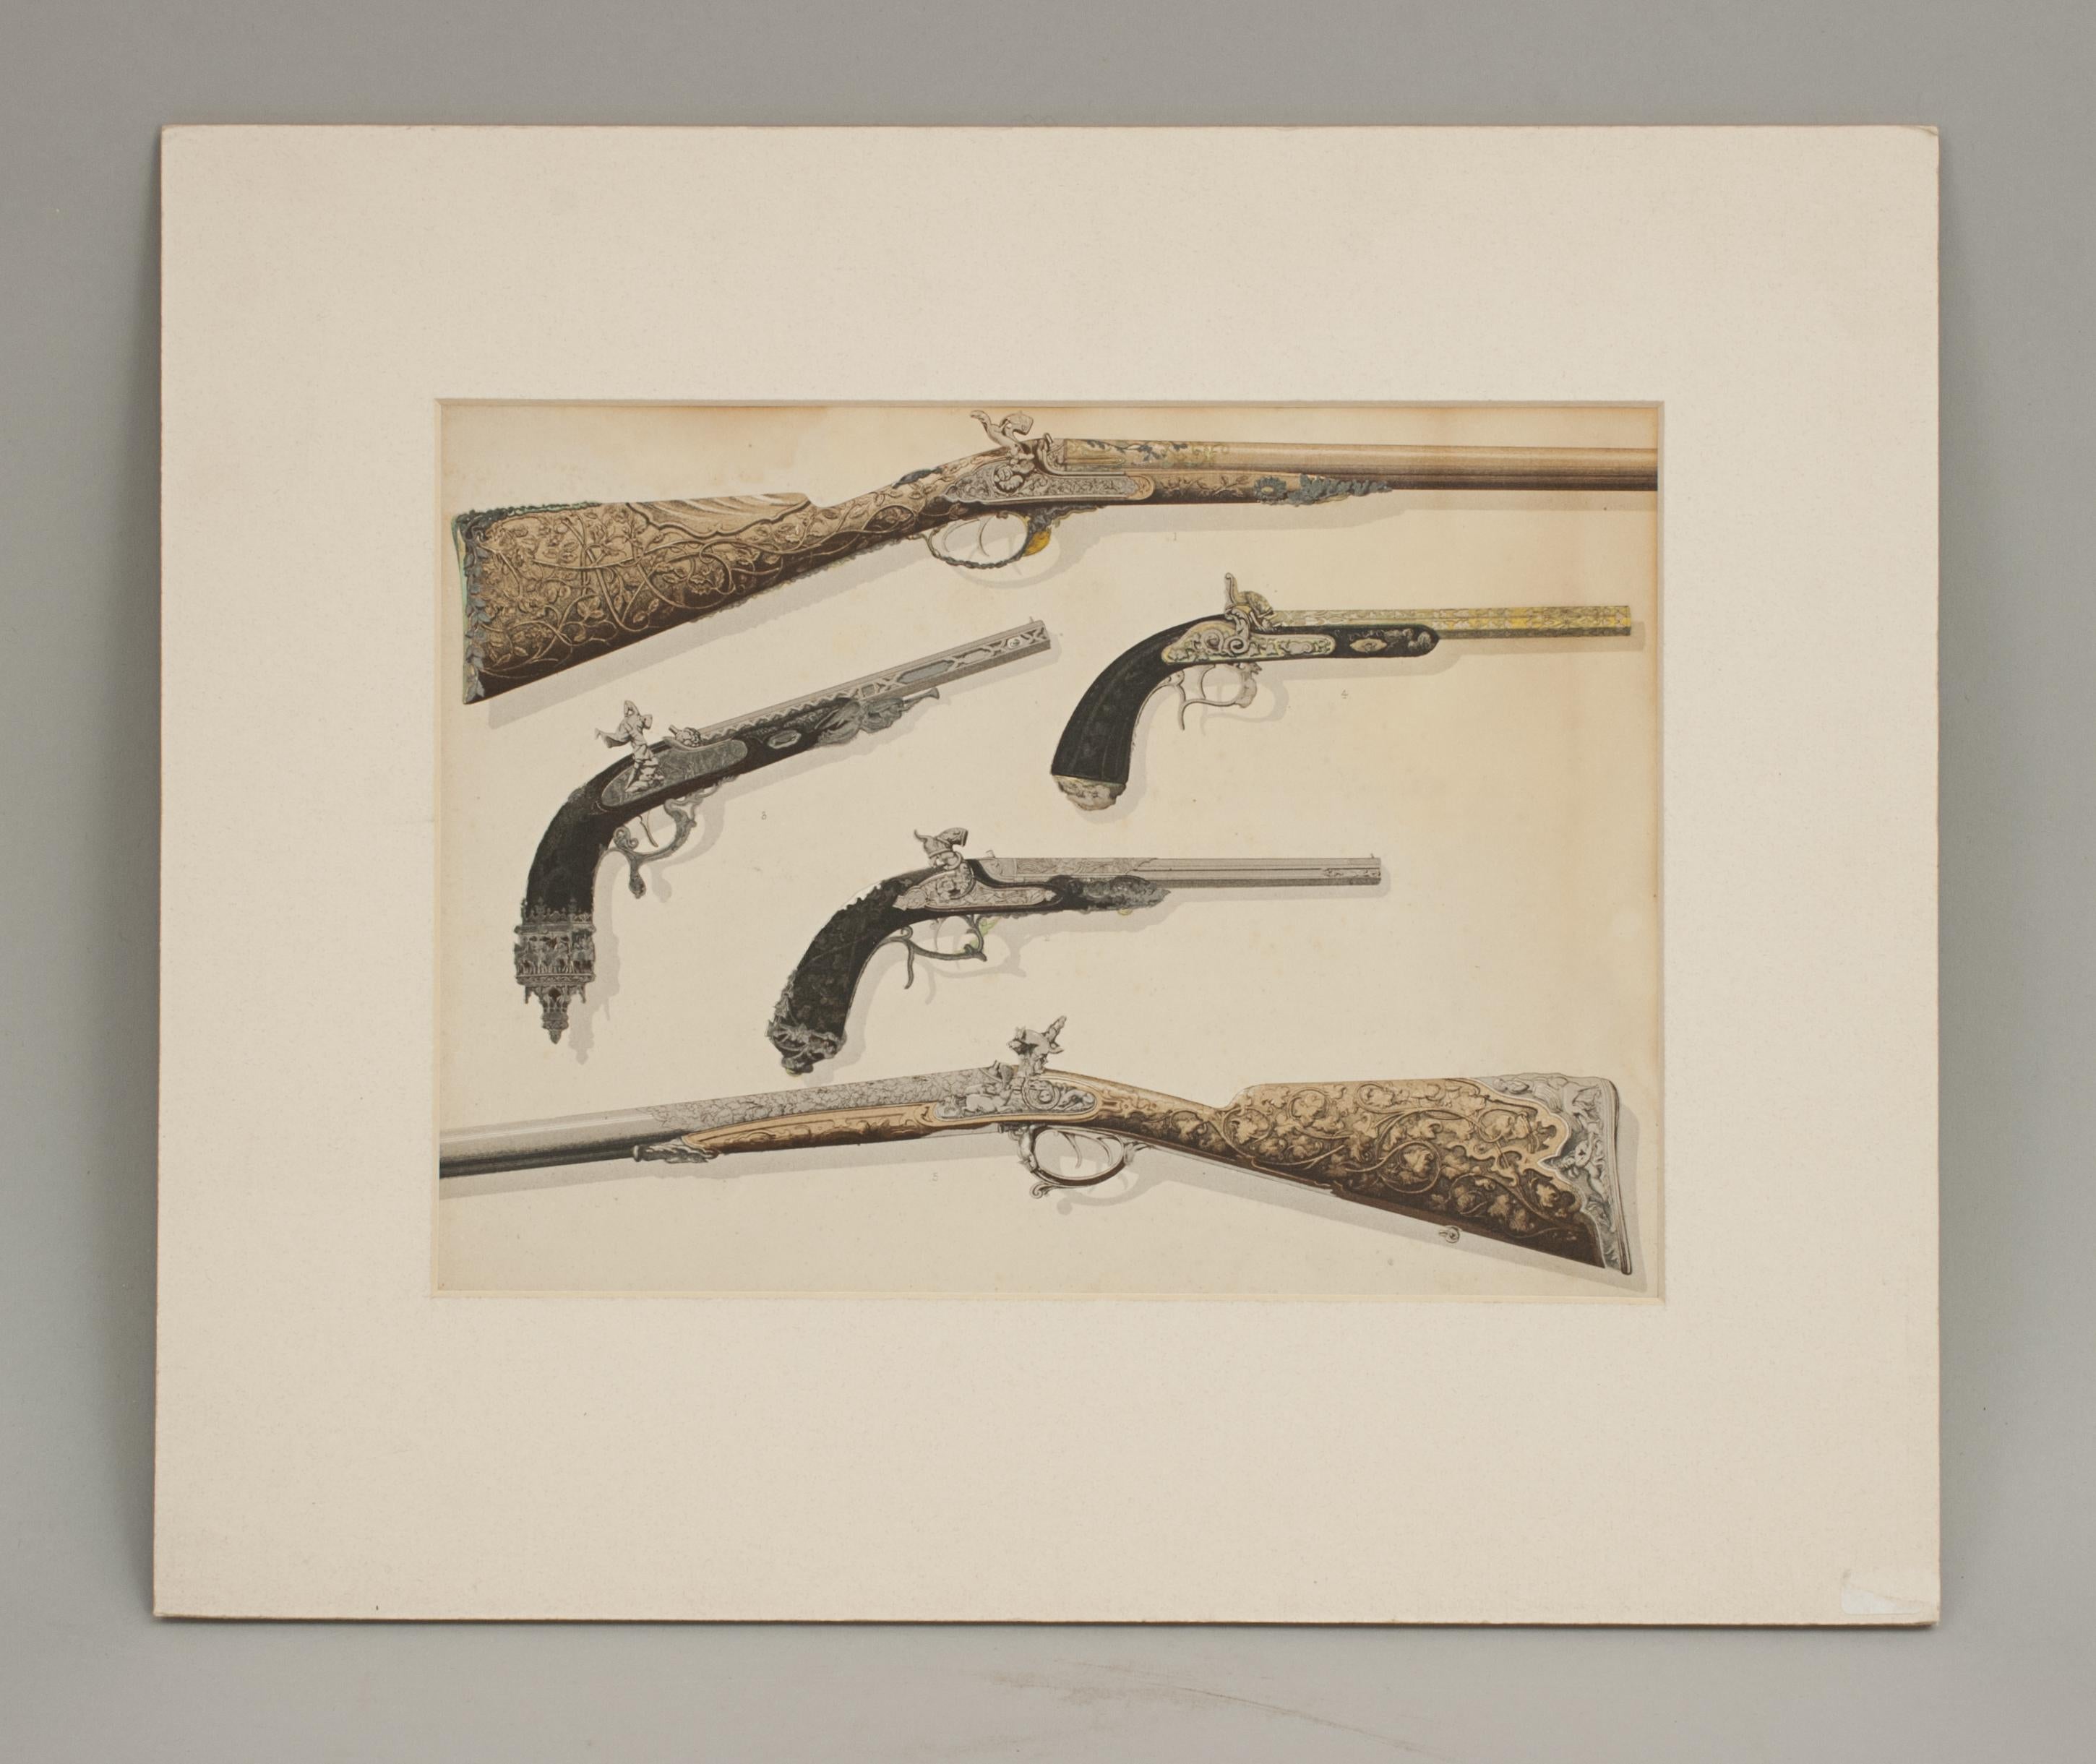 Sporting Art Pair of Antique Firearms, Guns, Pistols and Revolvers and Rifles Prints